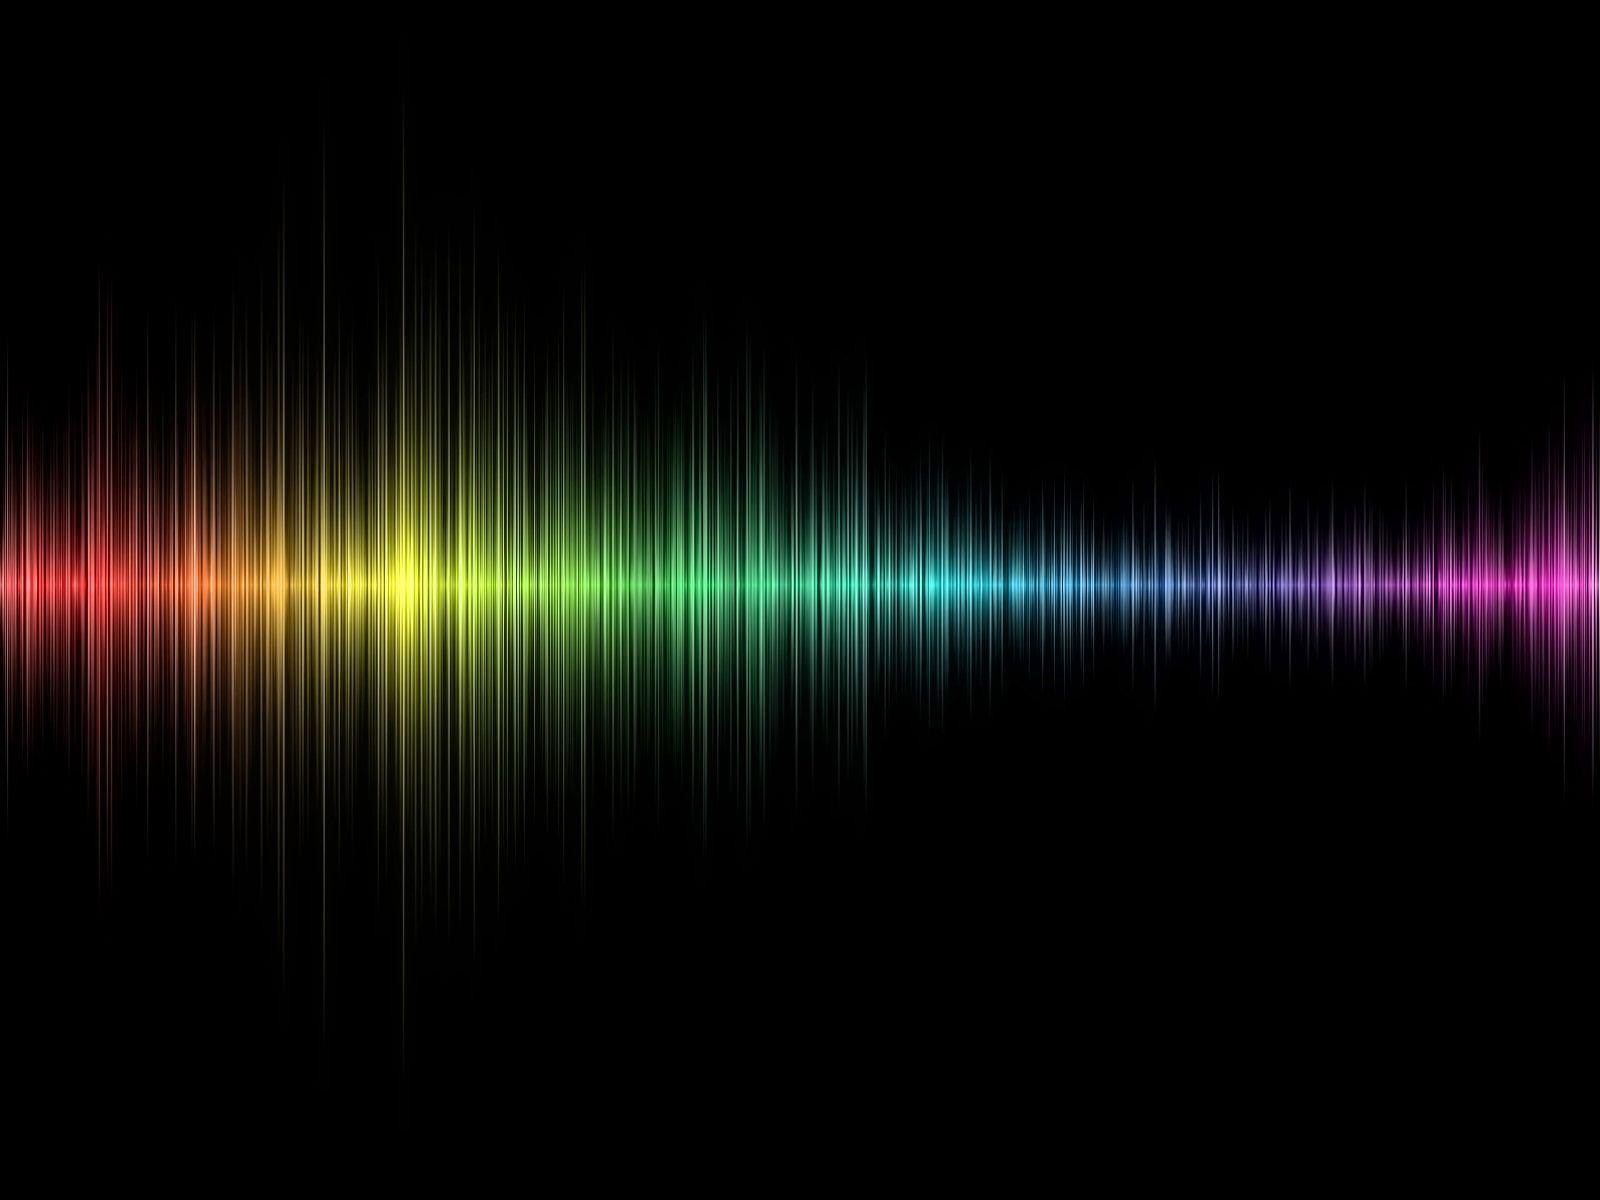 Wallpaper For > Cool Sound Waves Wallpaper